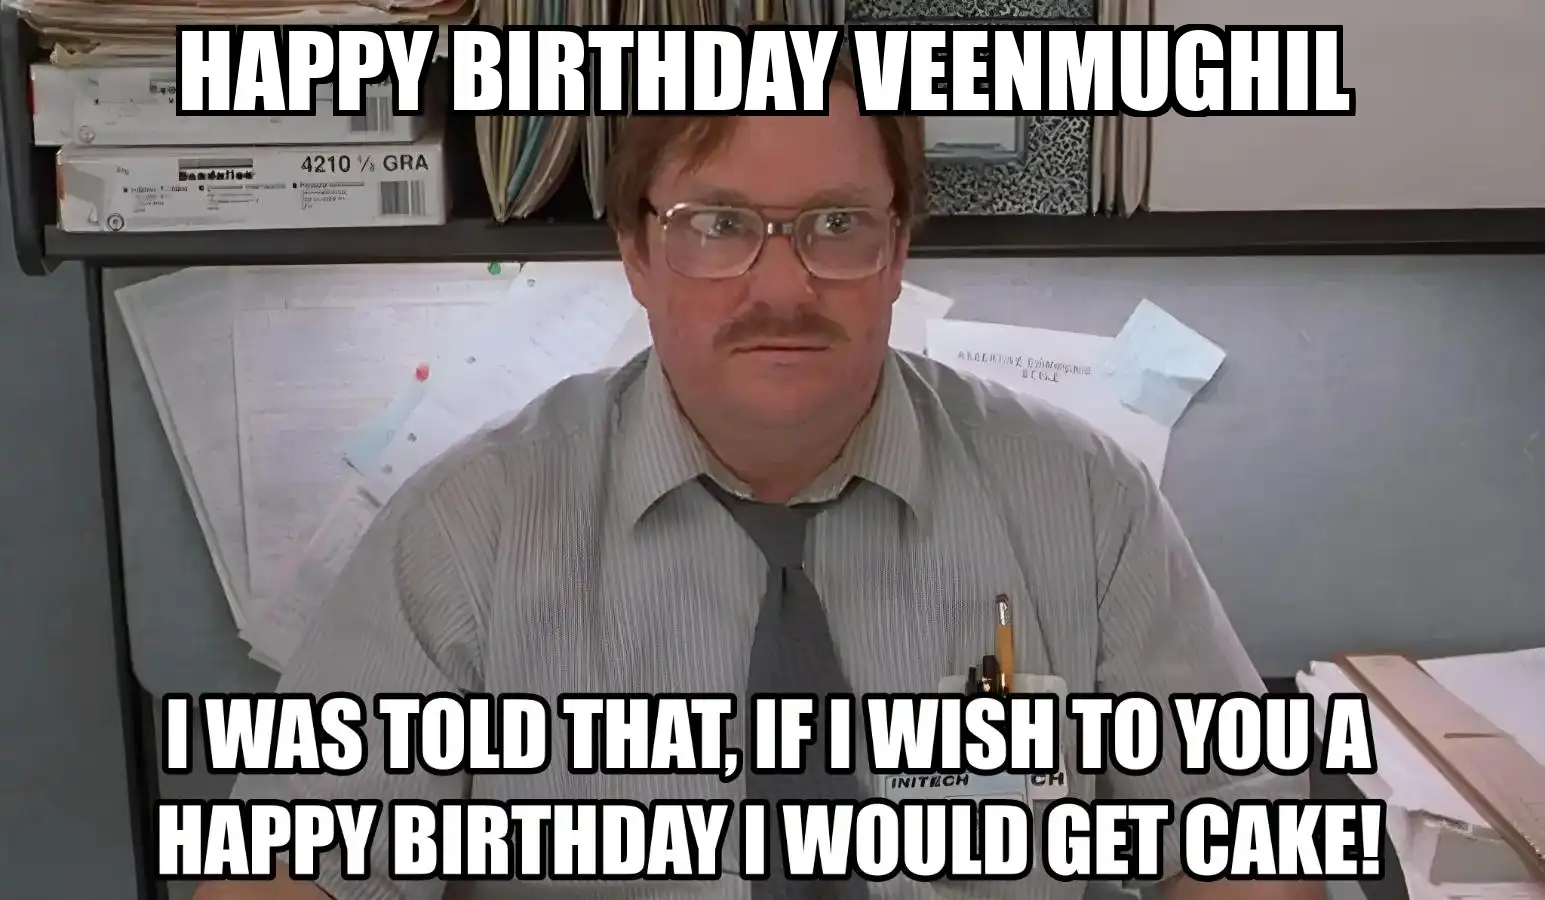 Happy Birthday Veenmughil I Would Get A Cake Meme